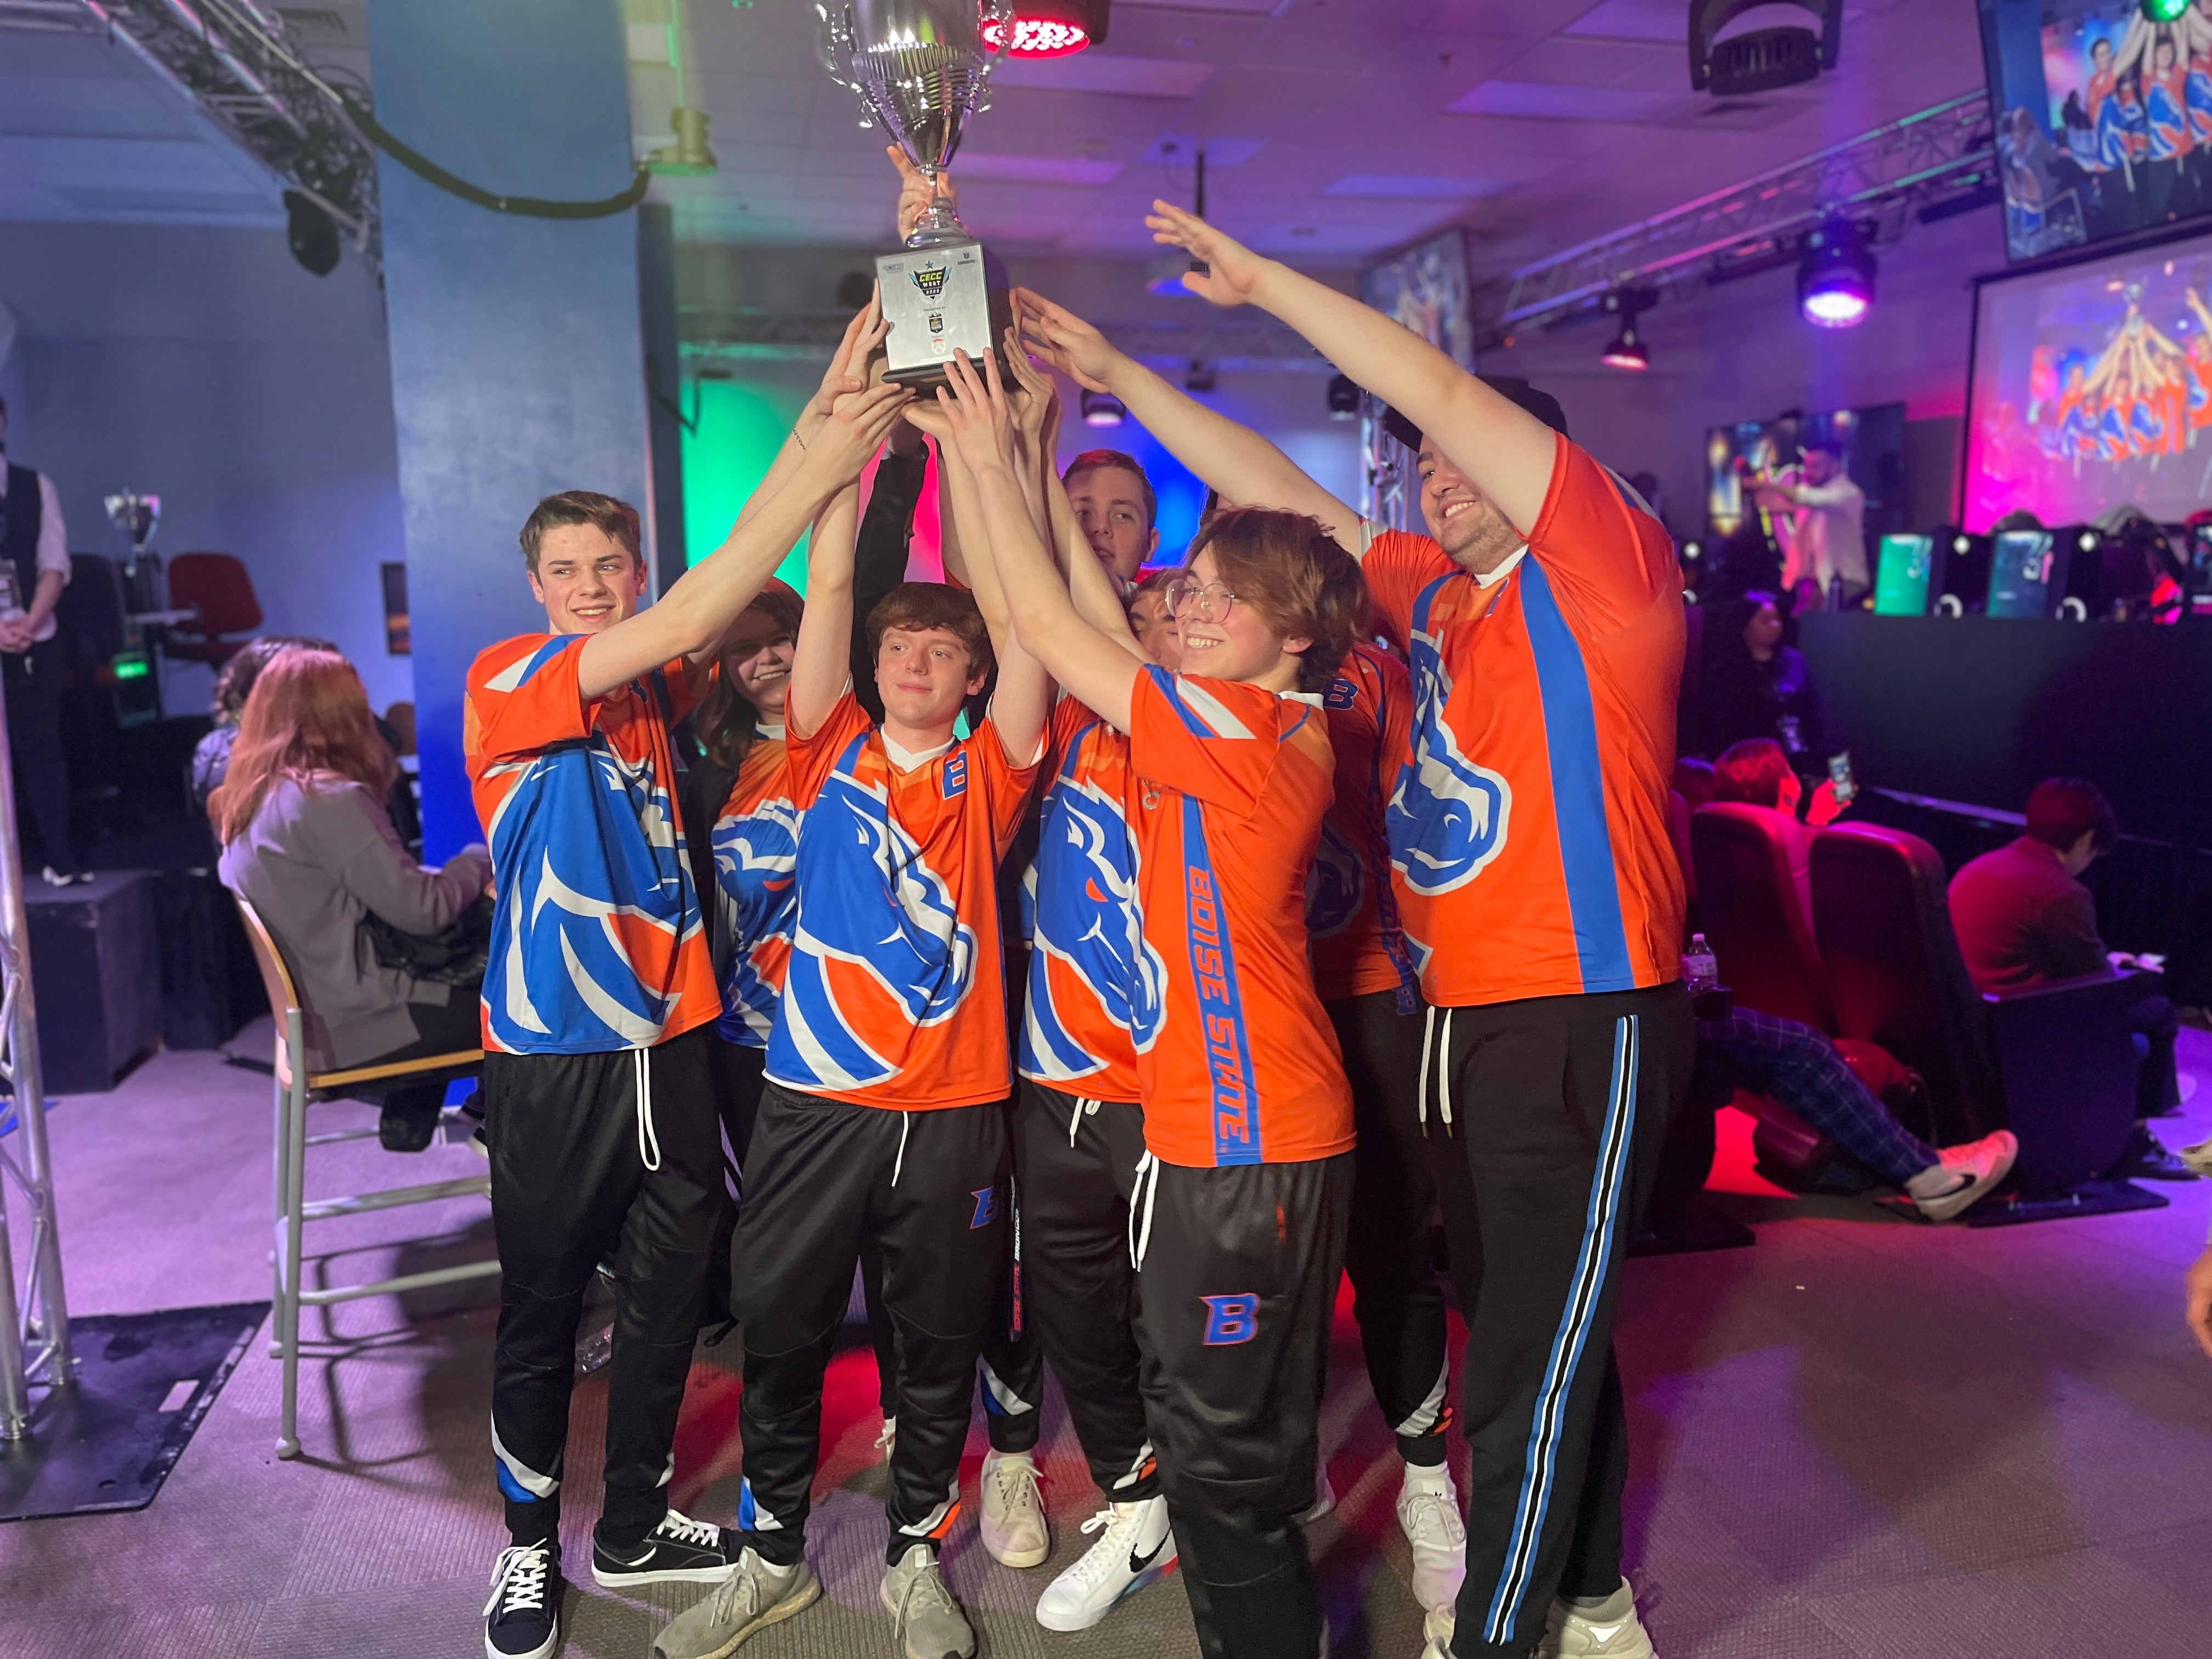 Boise State Overwatch players hold up the trophy for the CECC West Regionals.